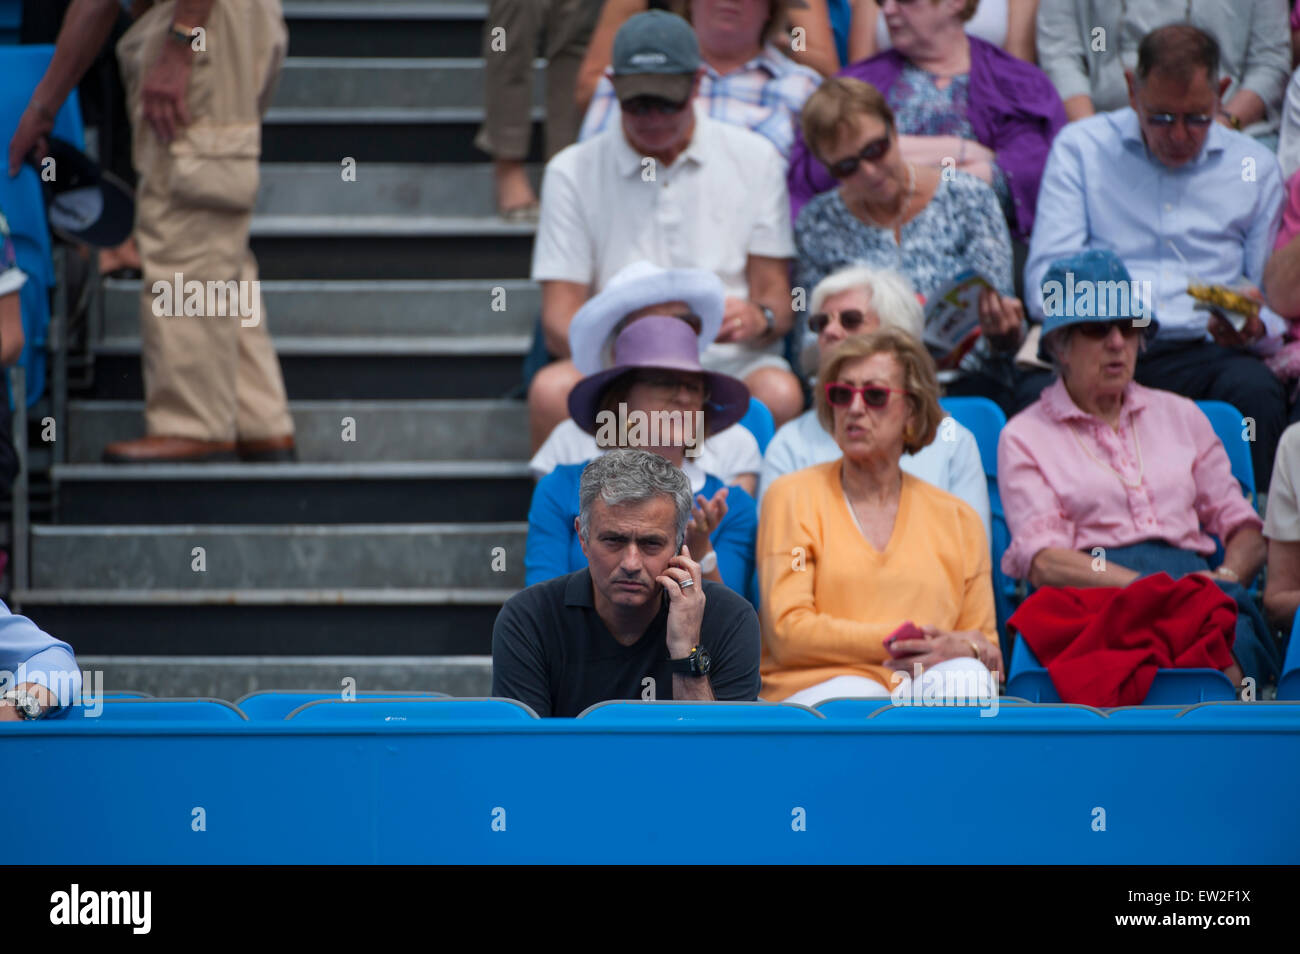 The Queen’s Club, London, UK. 16th June, Day 2 Round 1 match with Sam Querry (USA) playing Grigor Dimitrov (BUL) watched by Jose Mourinho, Chelsea Manager. Credit:  Malcolm Park editorial/Alamy Live News Stock Photo